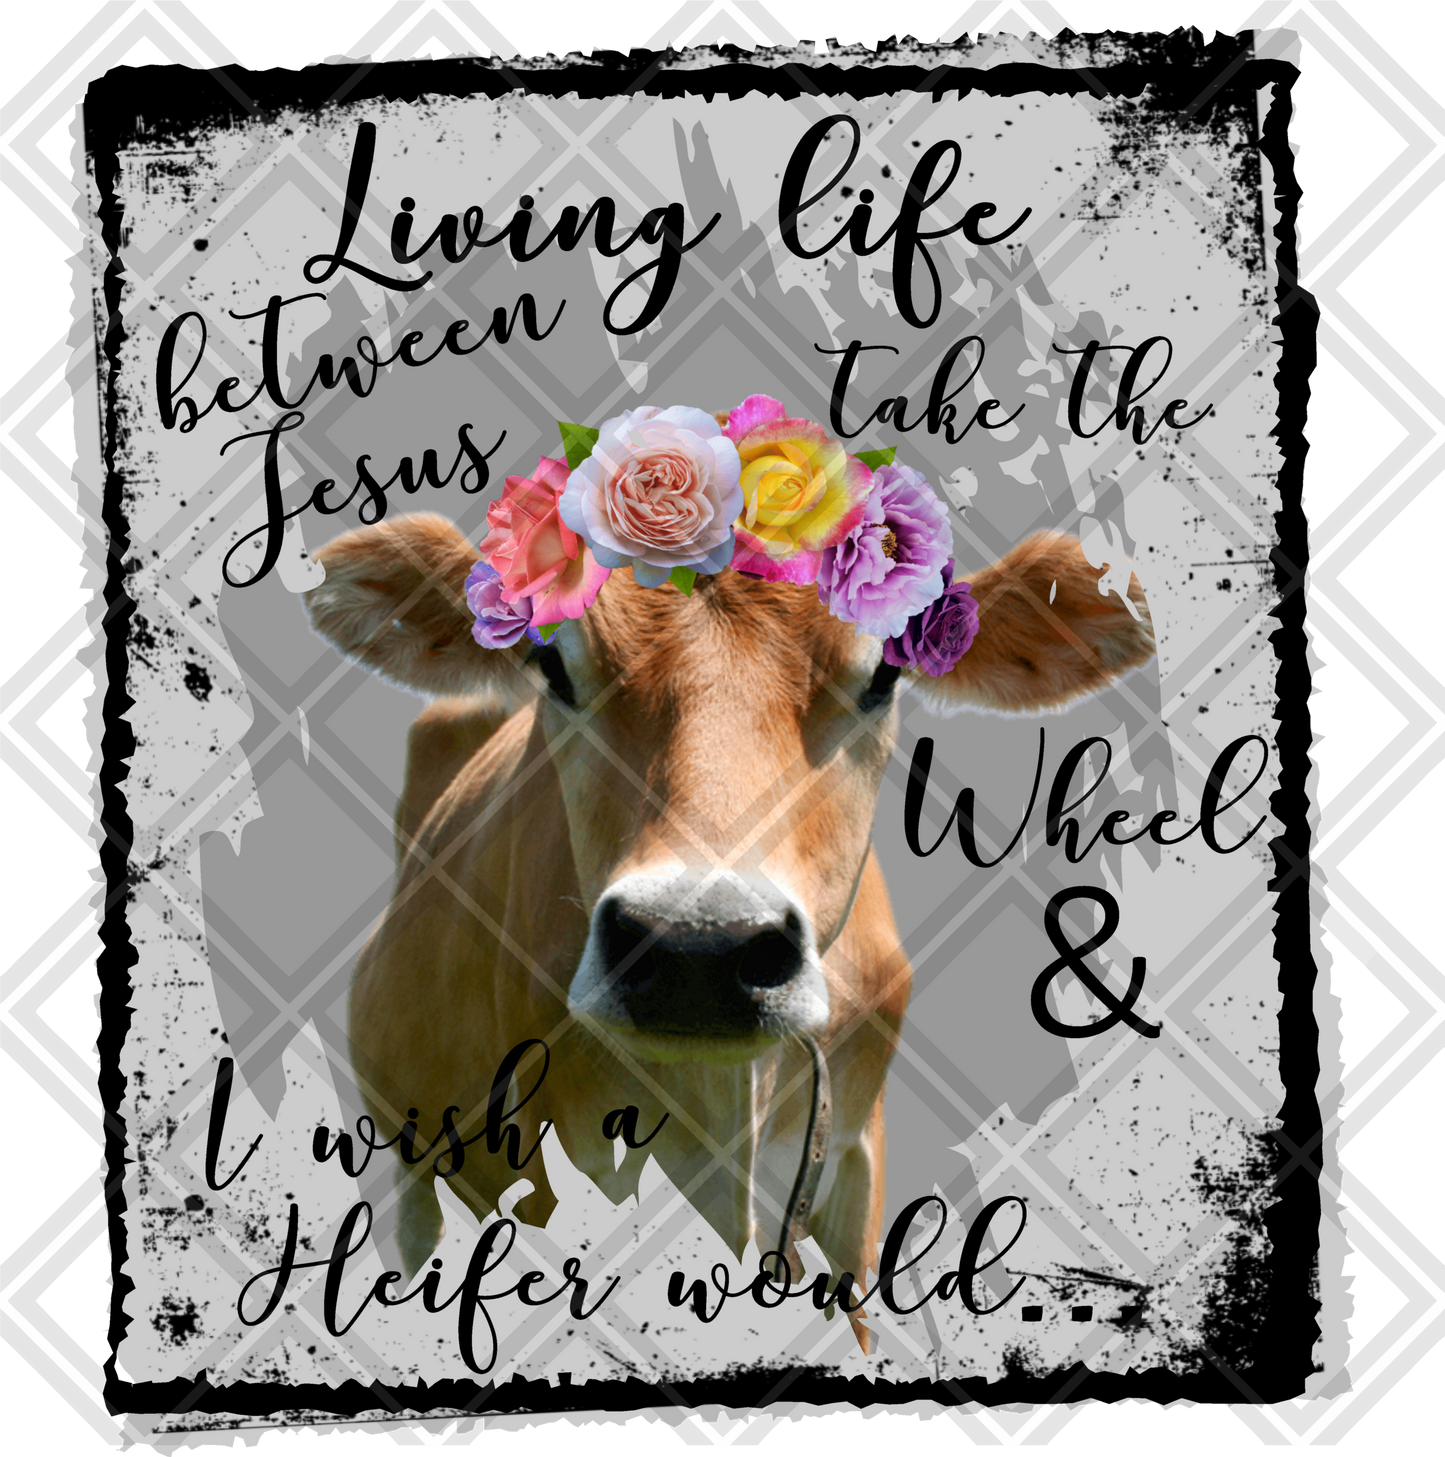 living somewhere between jesus take the wheel AND I WISH A HEIFER WOULD COW FLOWERS DTF TRANSFERPRINT TO ORDER